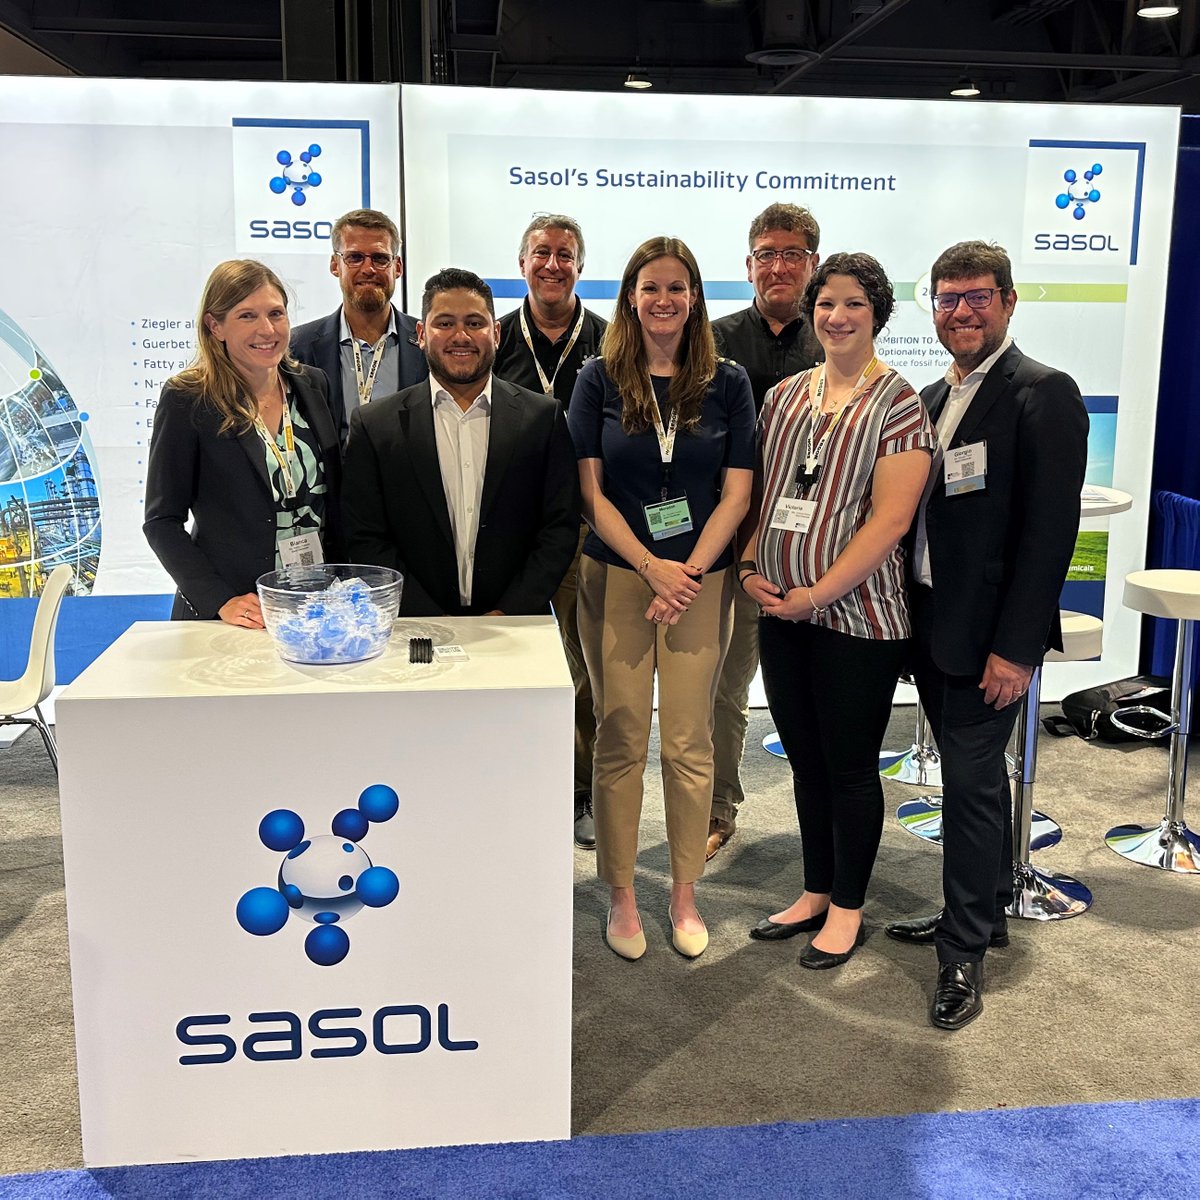 Our Metalworking & Lubricants team is at the STLE Annual Meeting. Please stop by booth 524 to meet our team and discuss your additive needs.

stle.org/AnnualMeeting/…

#SasolChemicals #STLE #MetalworkingLubricants